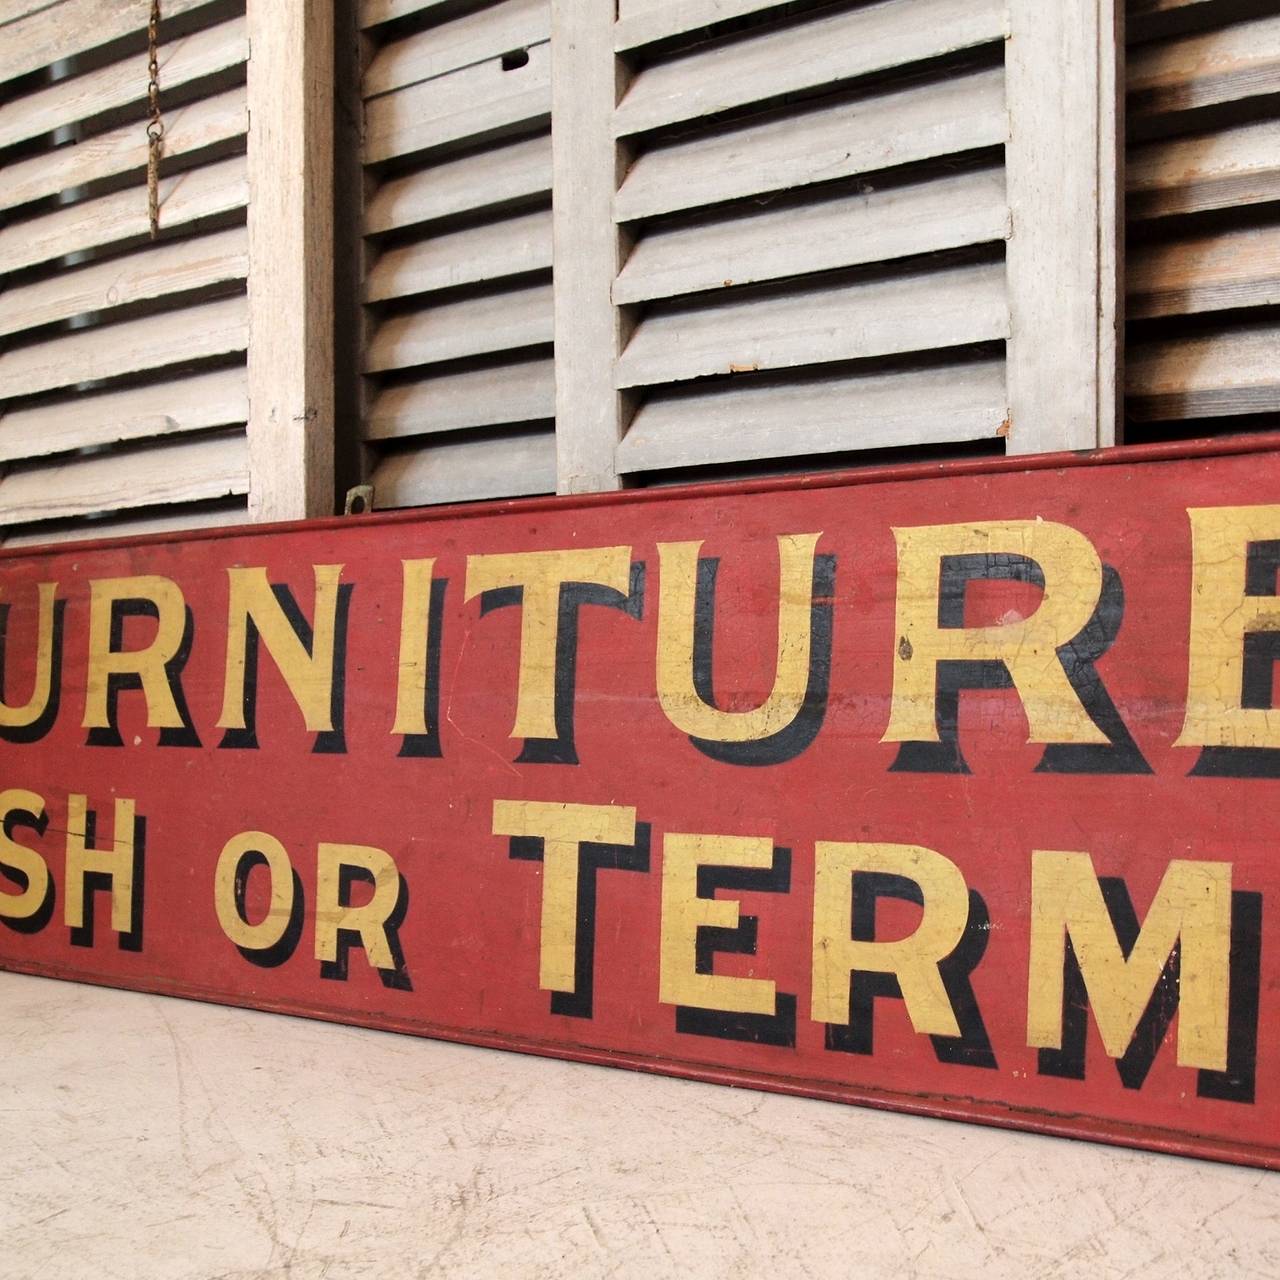 Both sides of the sign read the same 'FURNITURE - CASH OR TERMS' in hand-painted shadowed lettering.